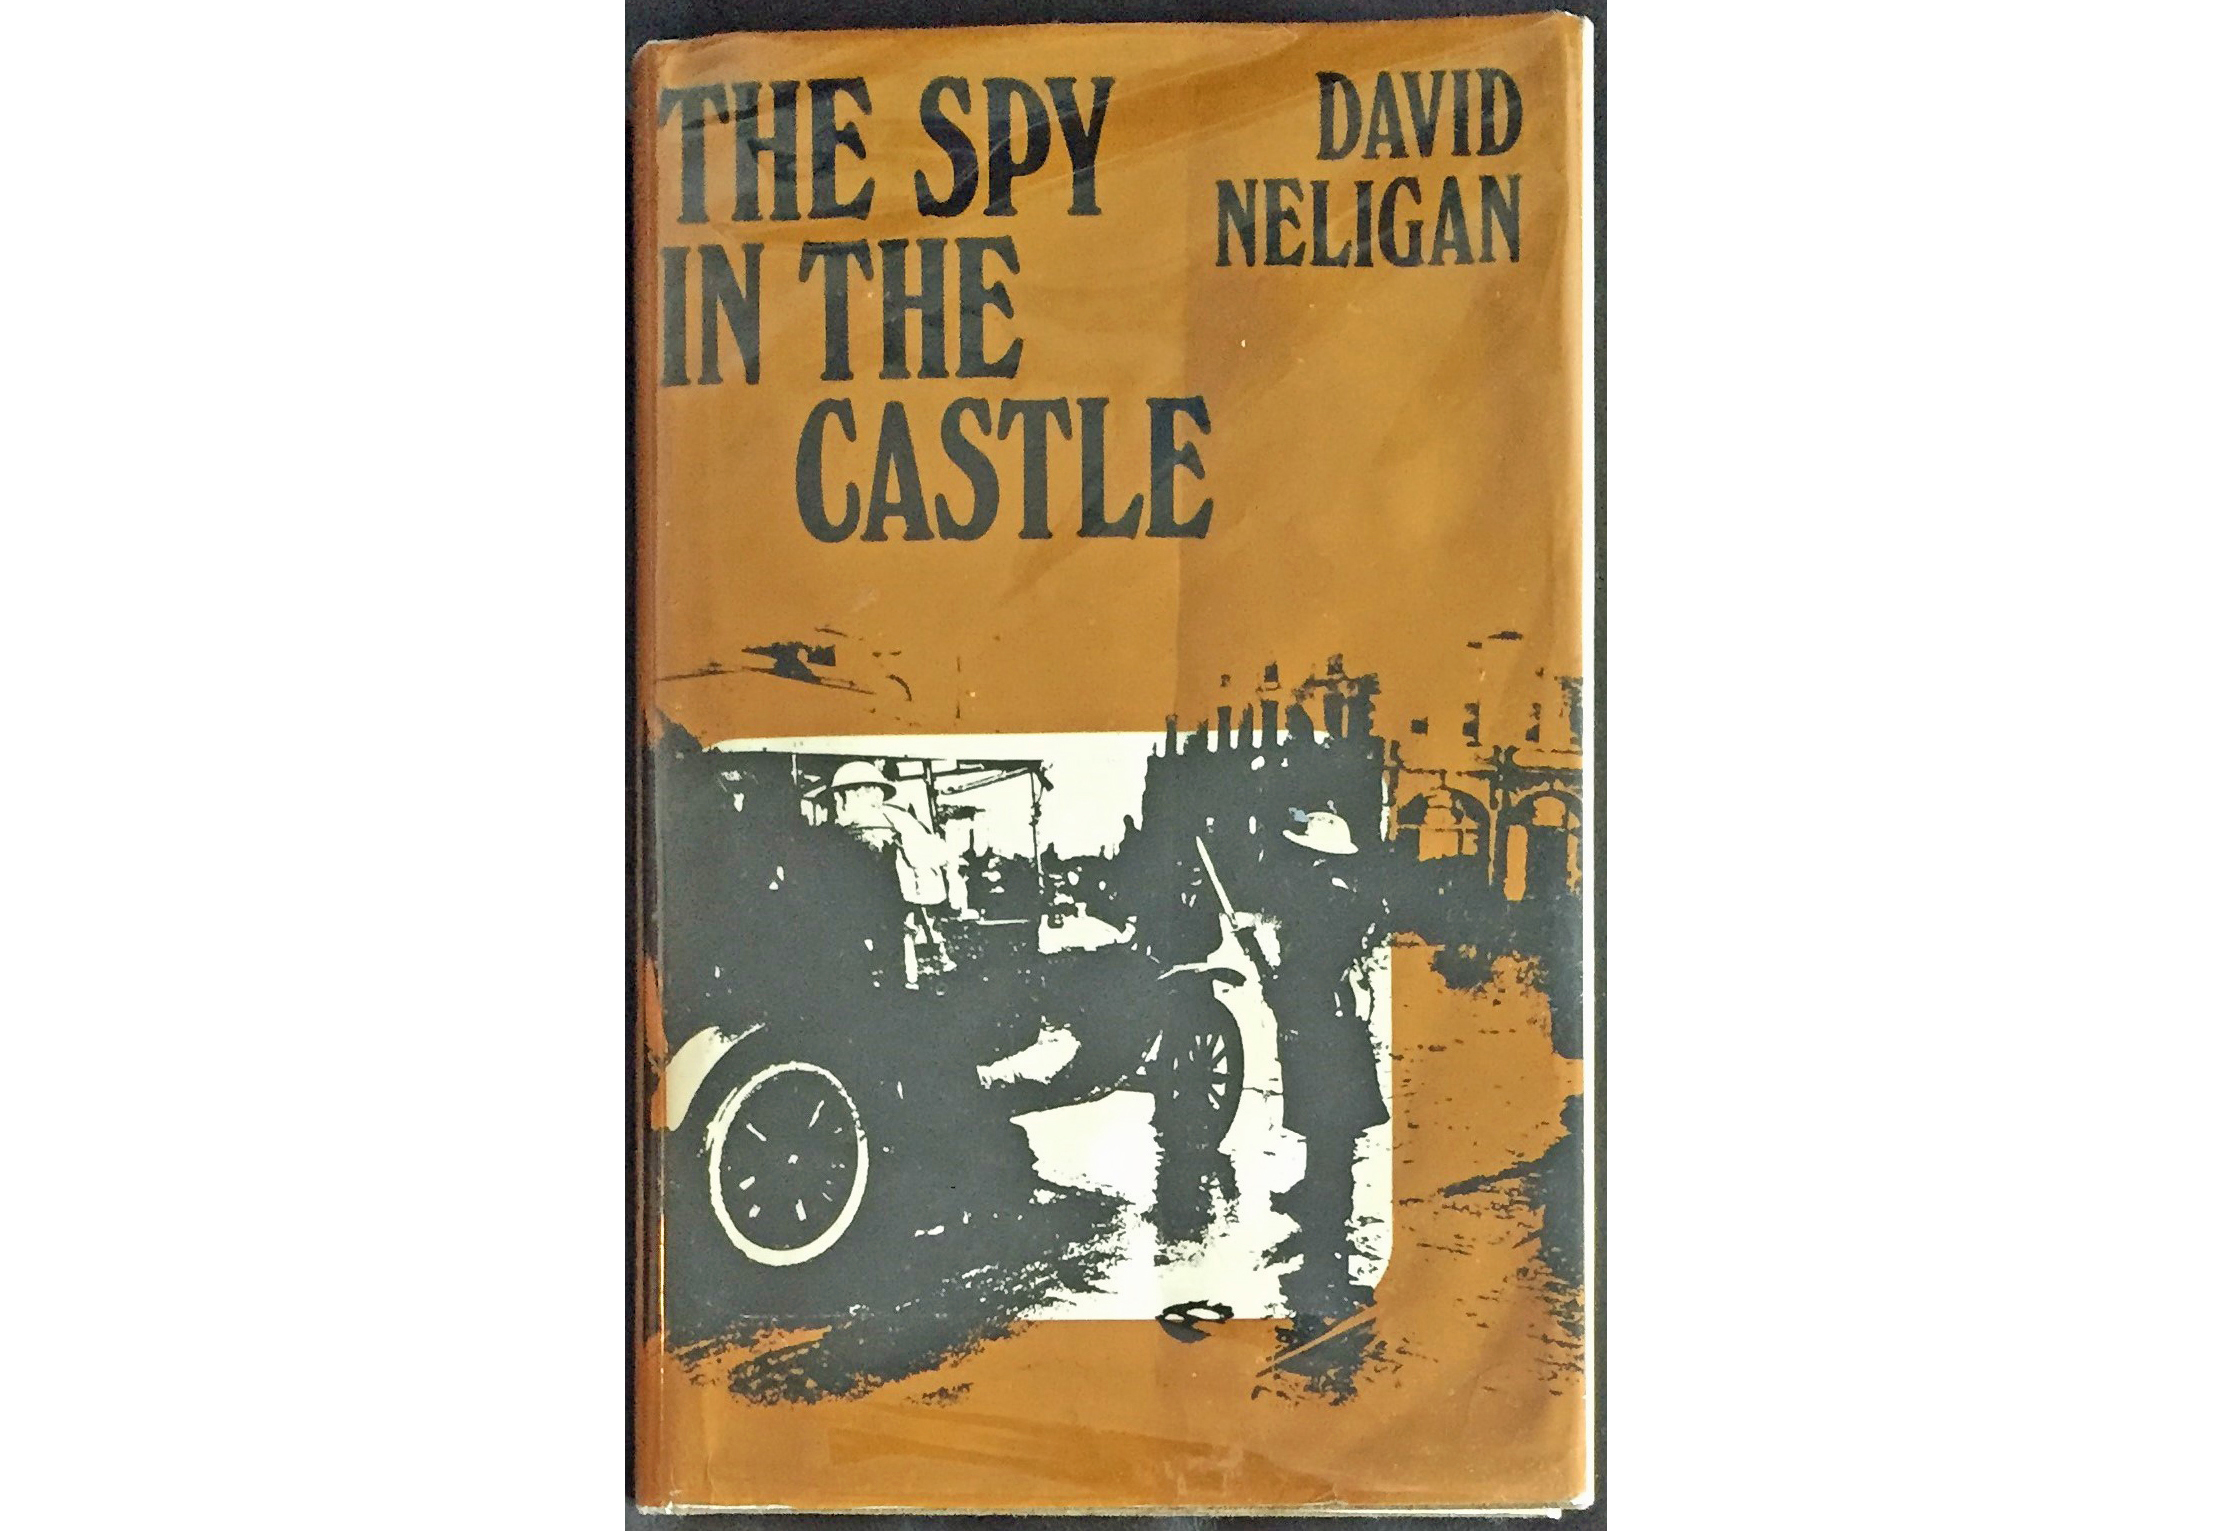 The cover of Neligan’s book, The Spy in The Castle.